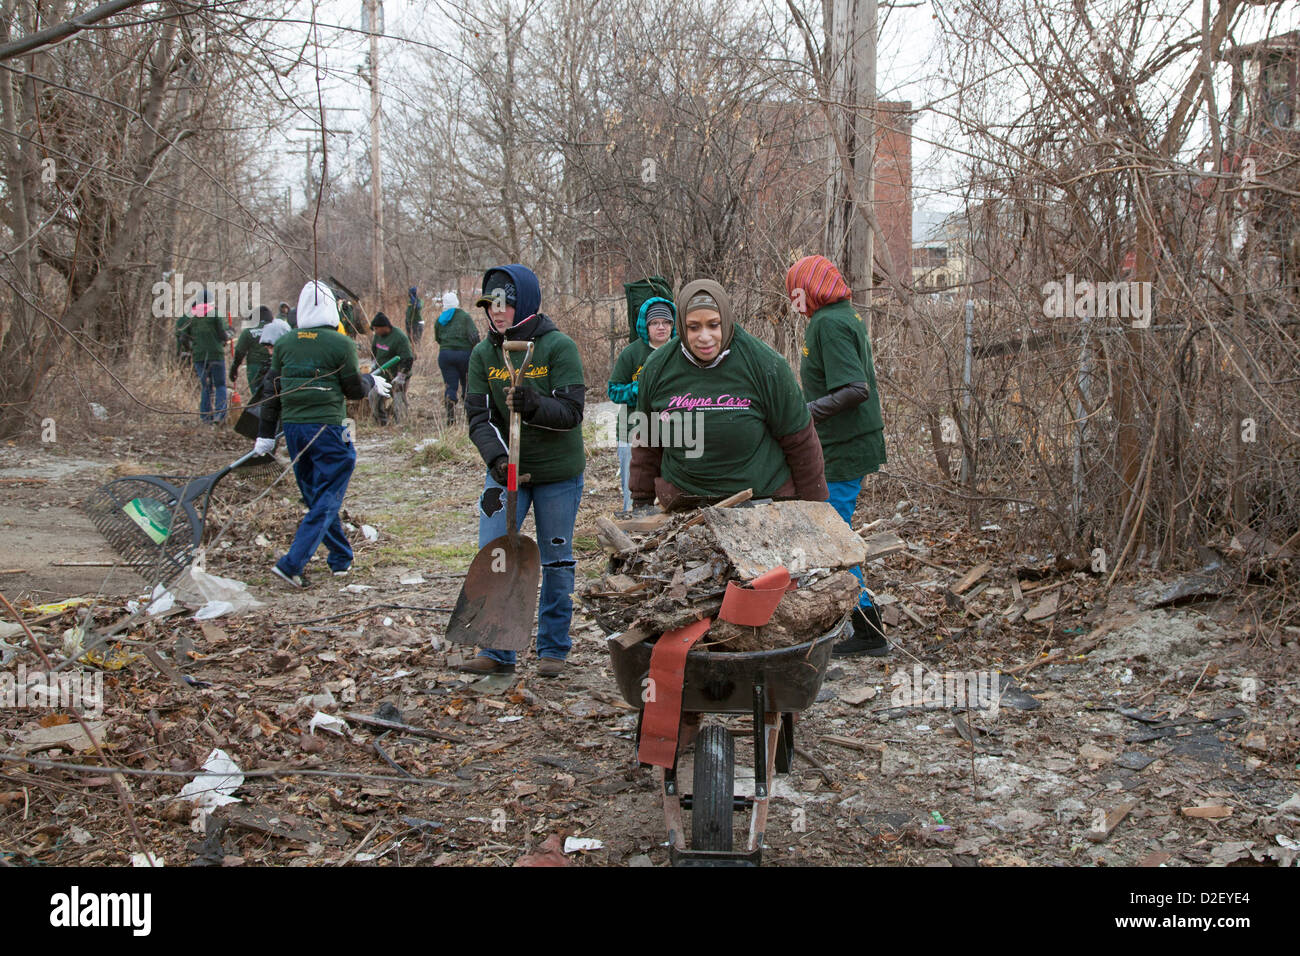 On Martin Luther King Day, college students and neighborhood residents volunteered to clean trash from vacant properties. Stock Photo